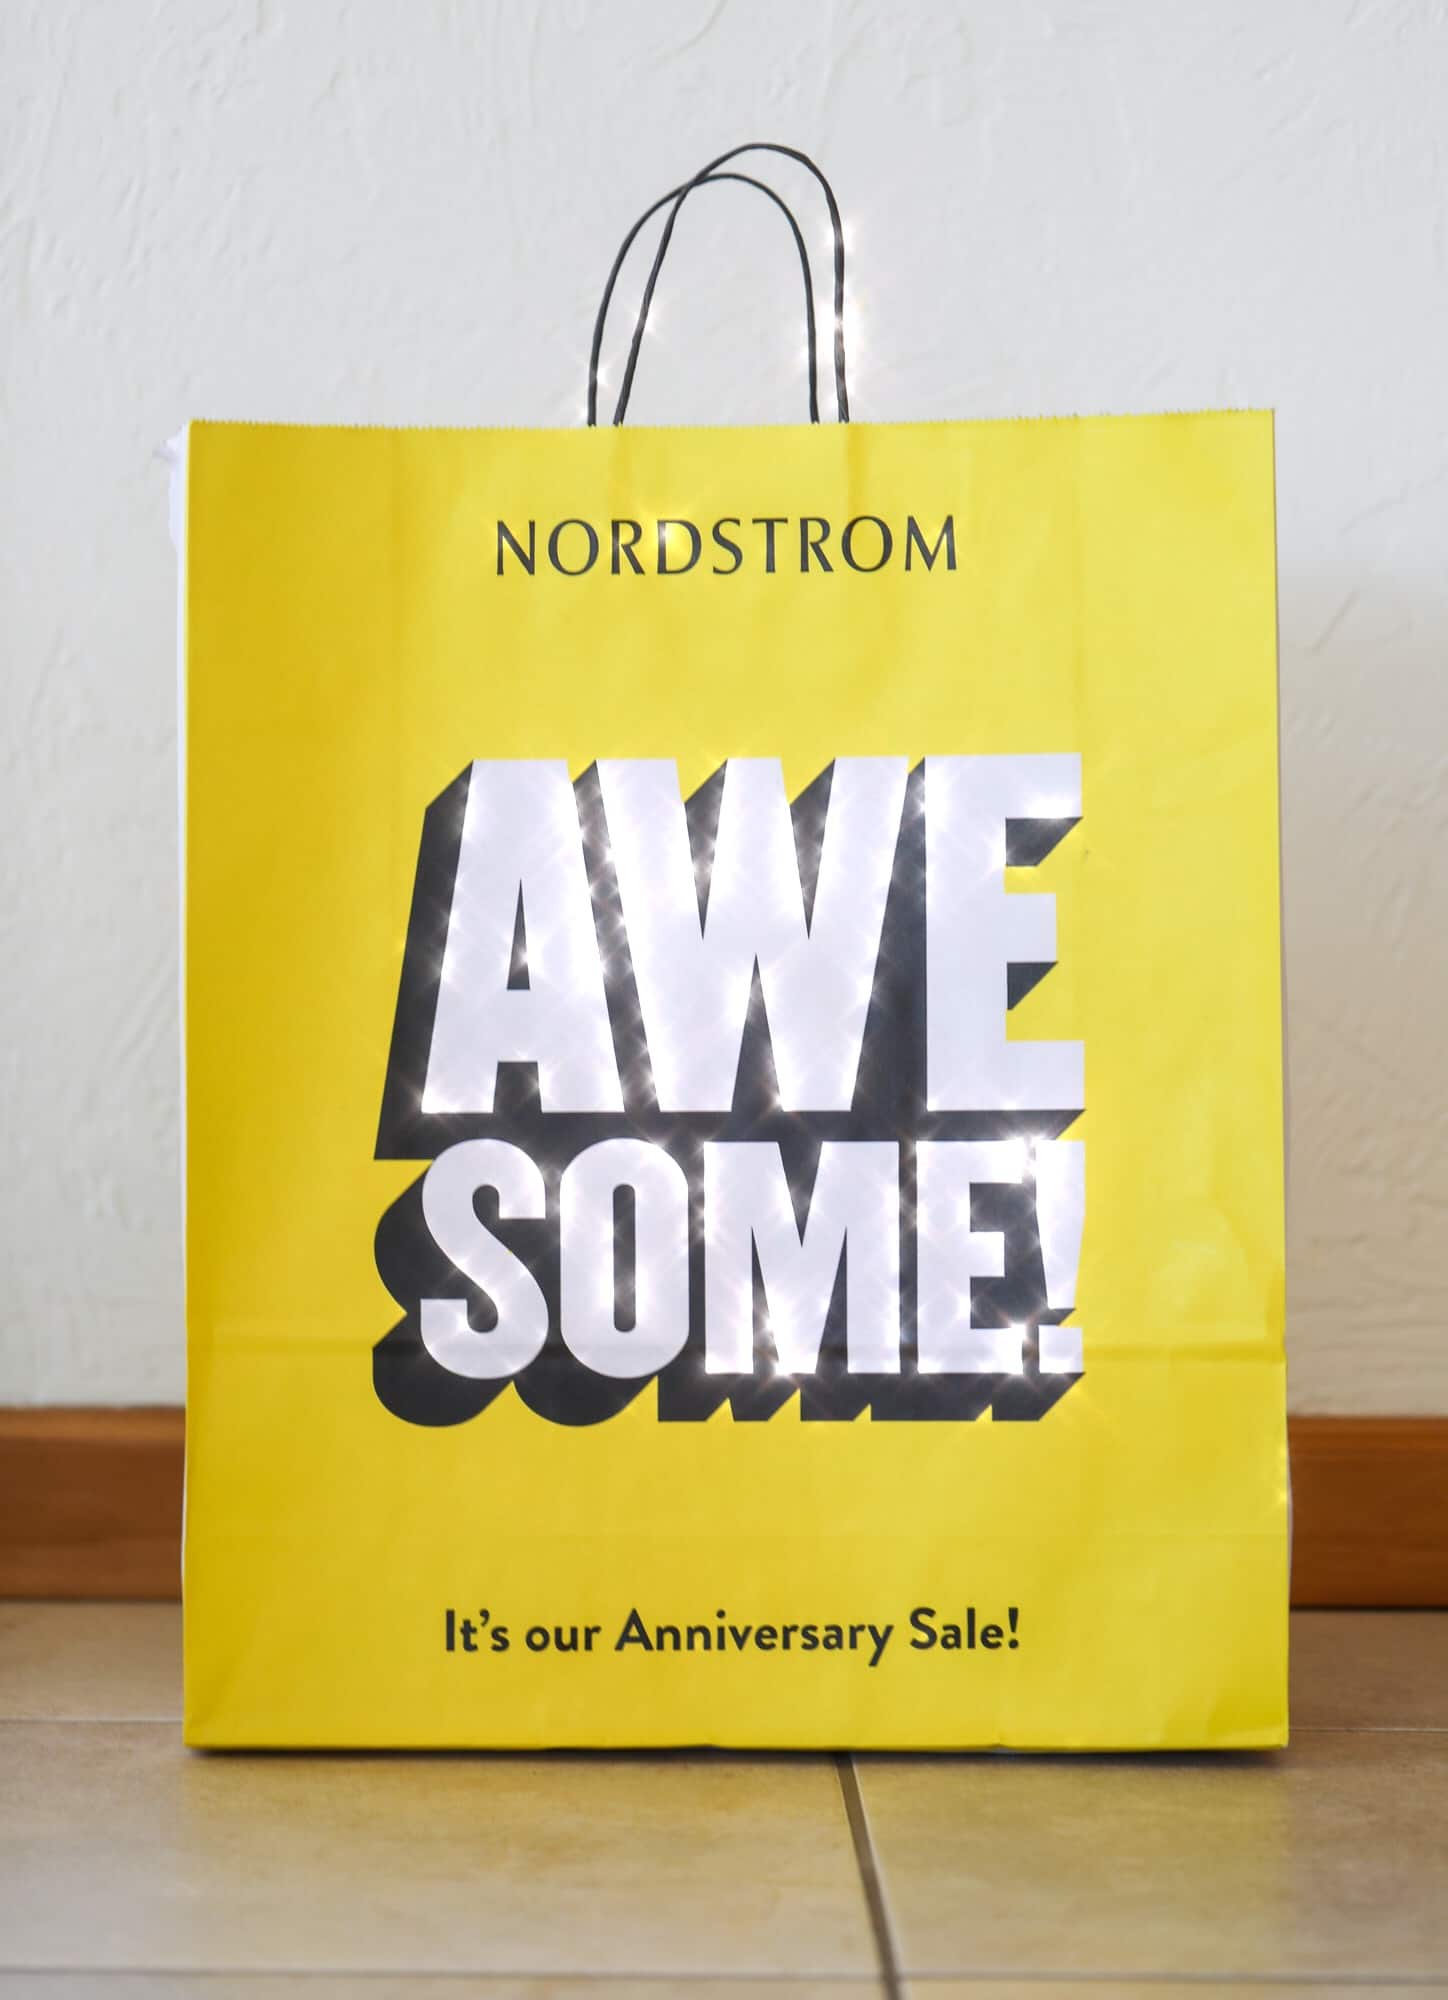 What To Buy at the 2018 Nordstrom Anniversary Sale